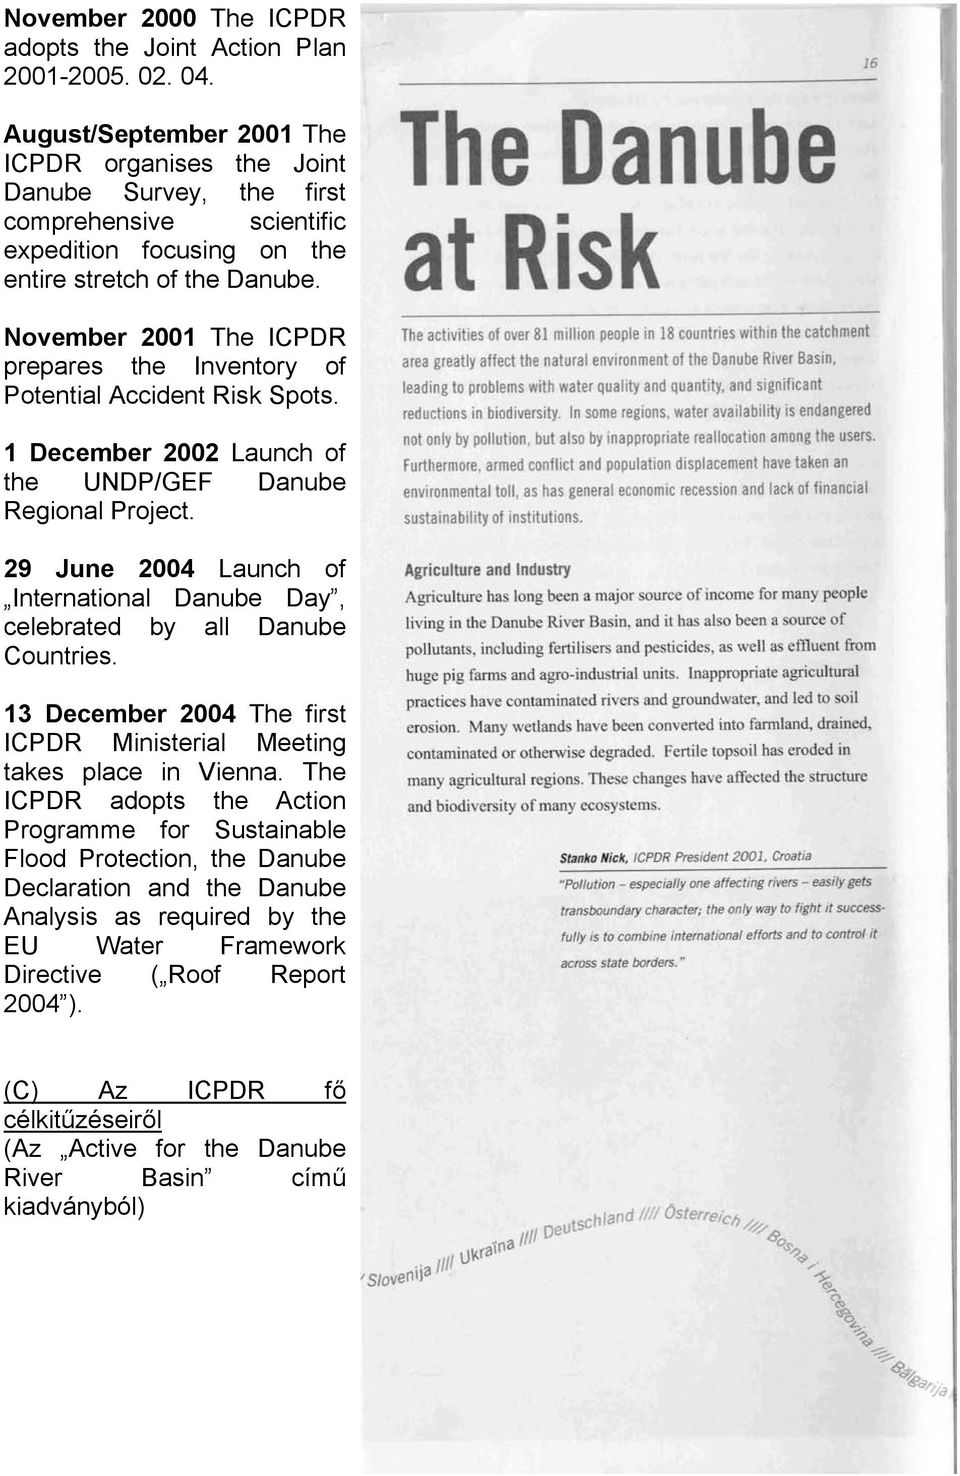 November 2001 The ICPDR prepares the Inventory of Potential Accident Risk Spots. 1 December 2002 Launch of the UNDP/GEF Danube Regional Project.